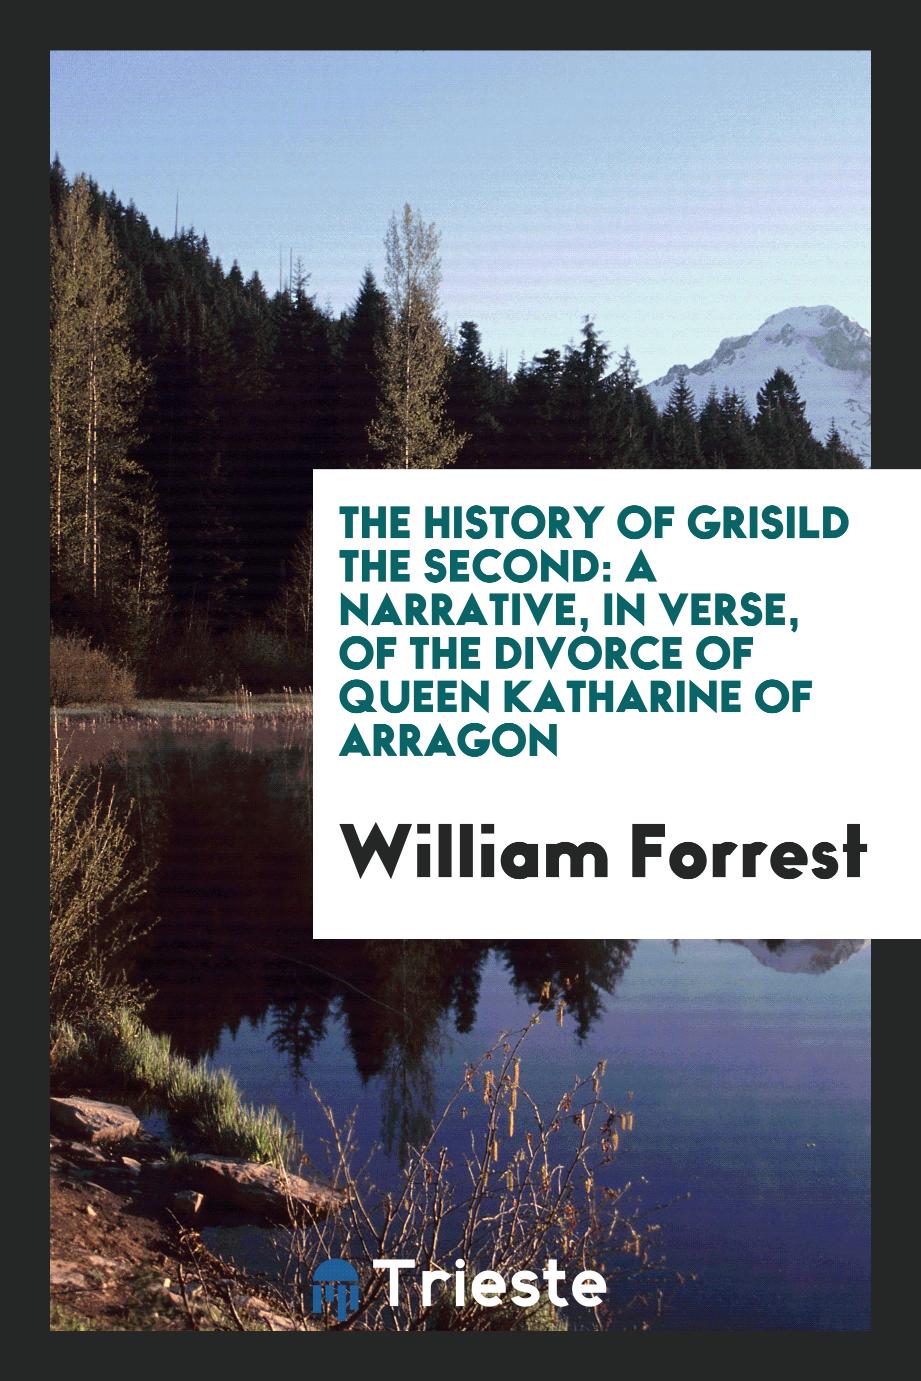 The history of Grisild the Second: a narrative, in verse, of the divorce of Queen Katharine of Arragon